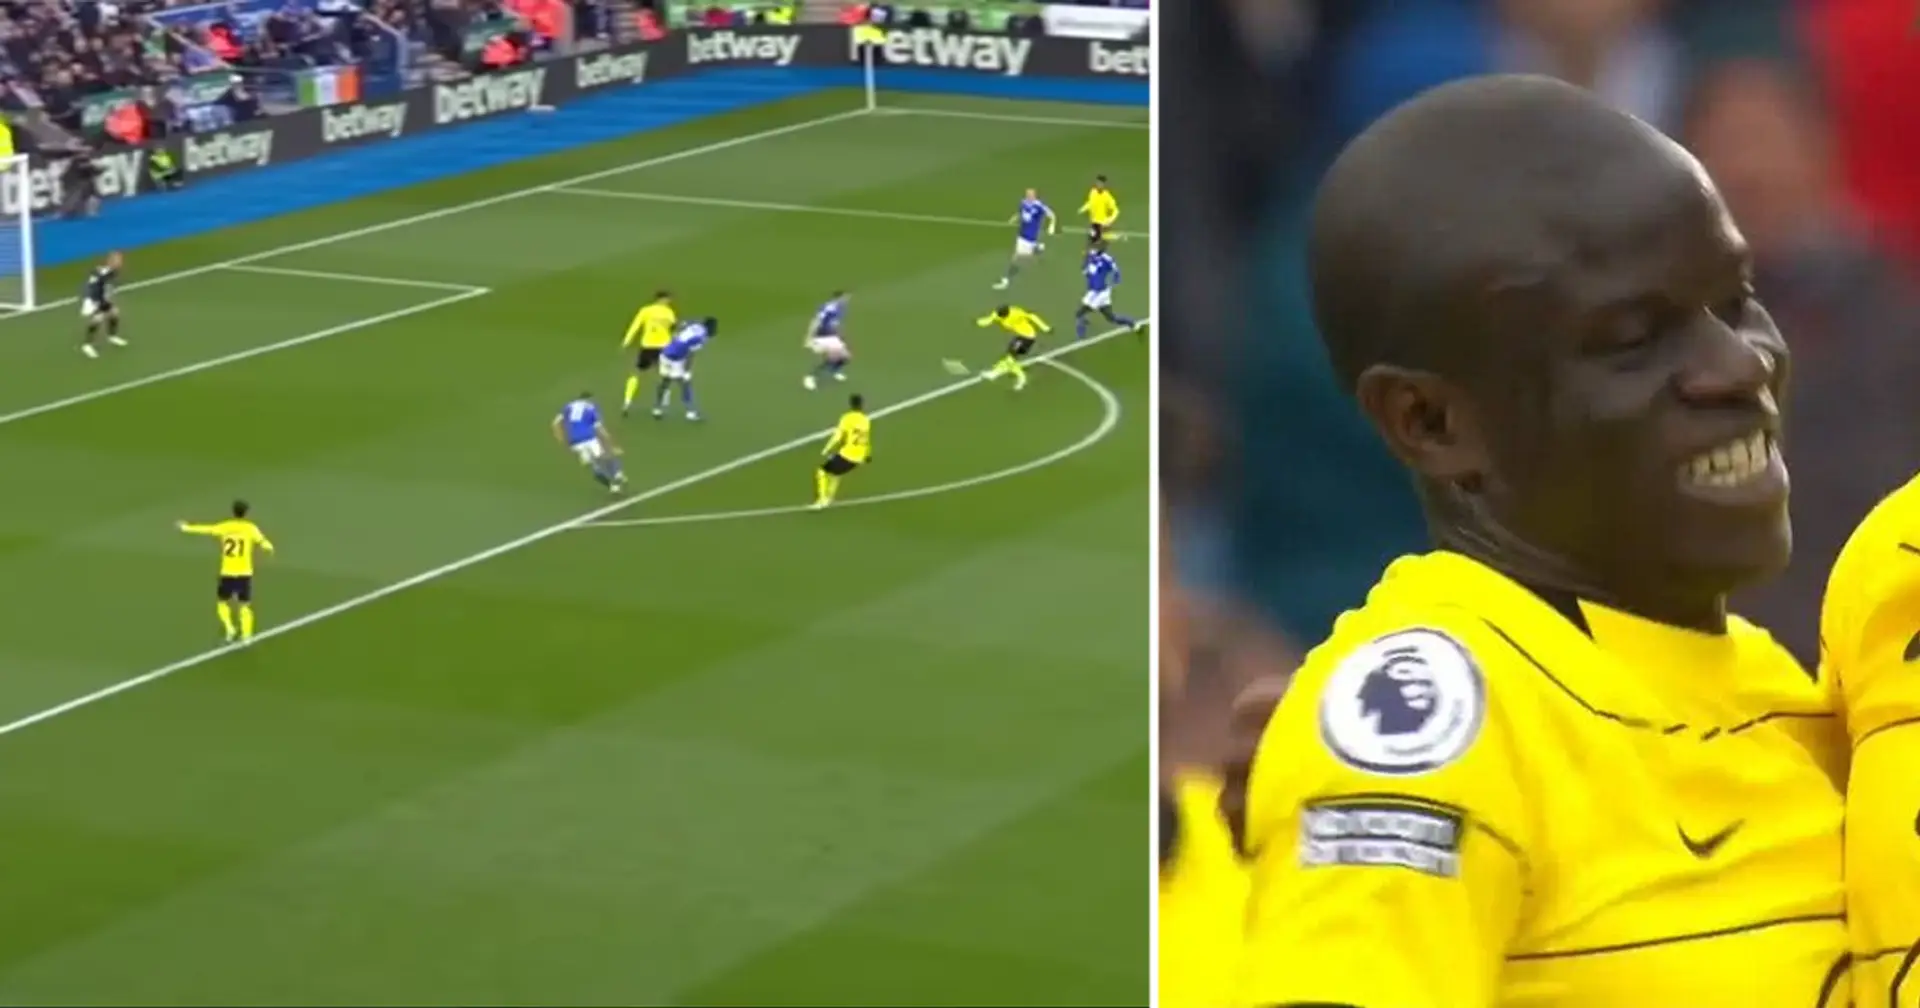 N'Golo Kante's solo goal up for Premier League Goal of the Month award (video)